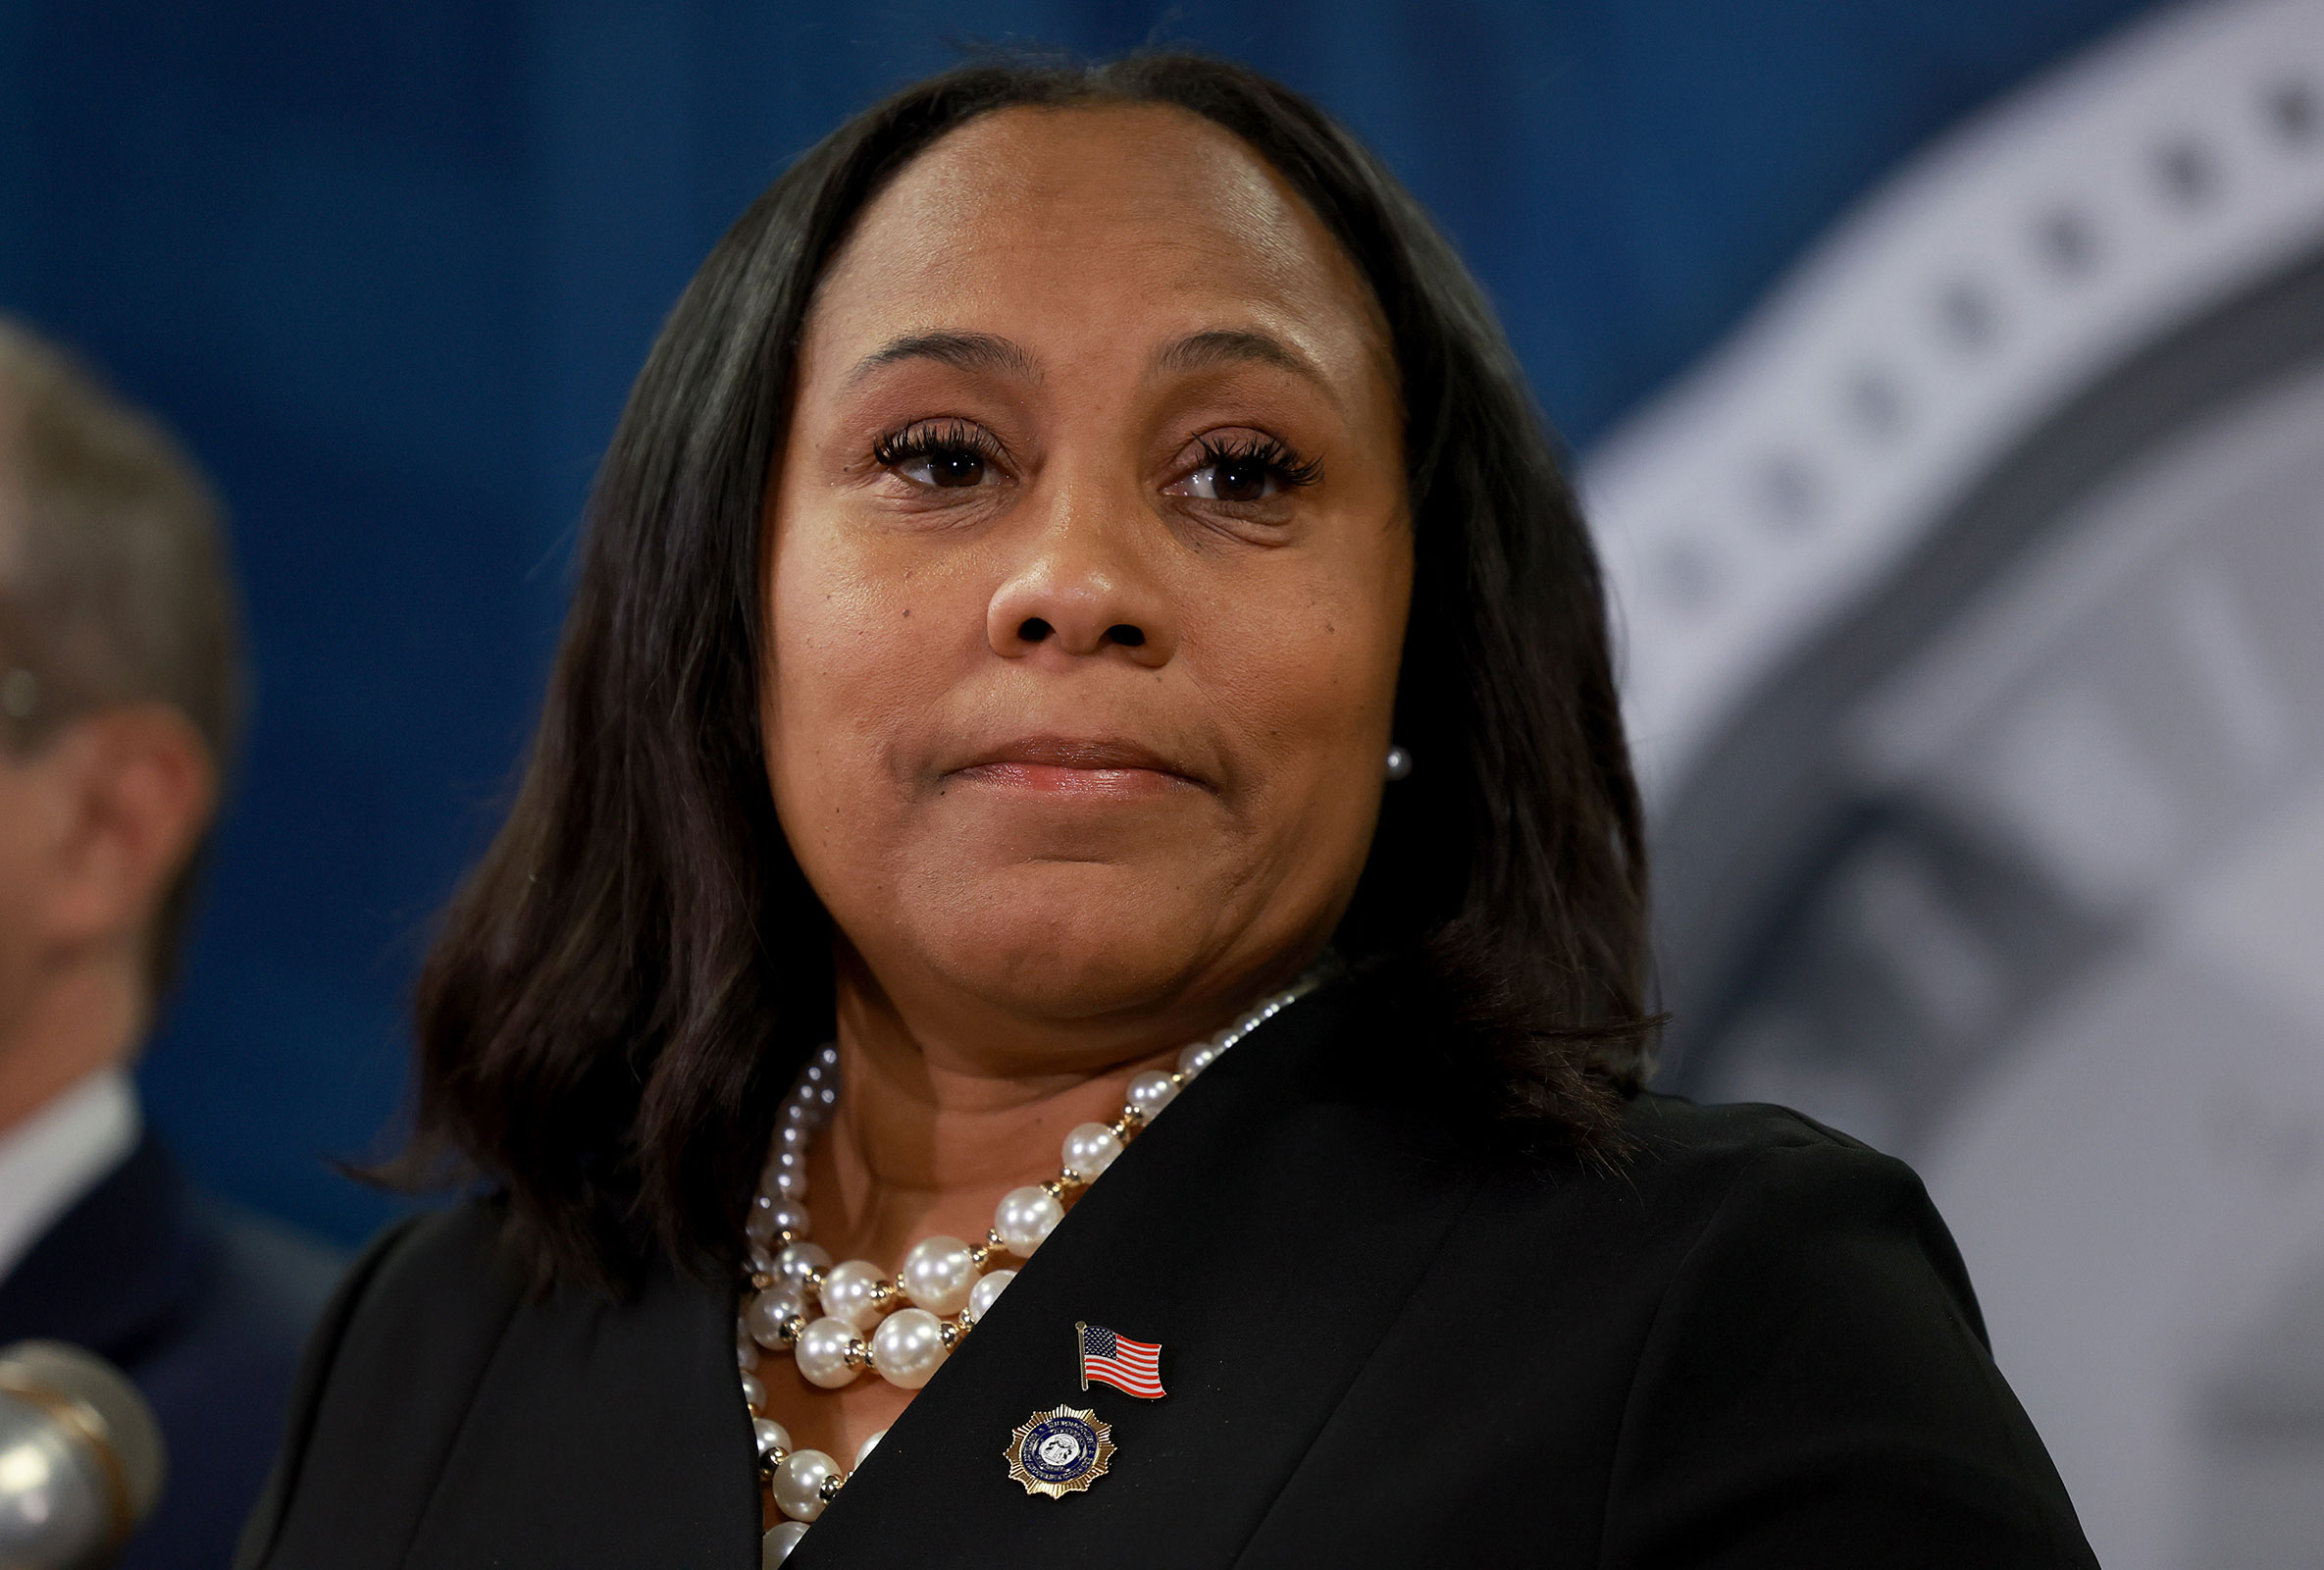 Fulton County District Attorney Fani Willis speaks during a news conference at the Fulton County Government building on August 14, 2023 in Atlanta, Georgia.